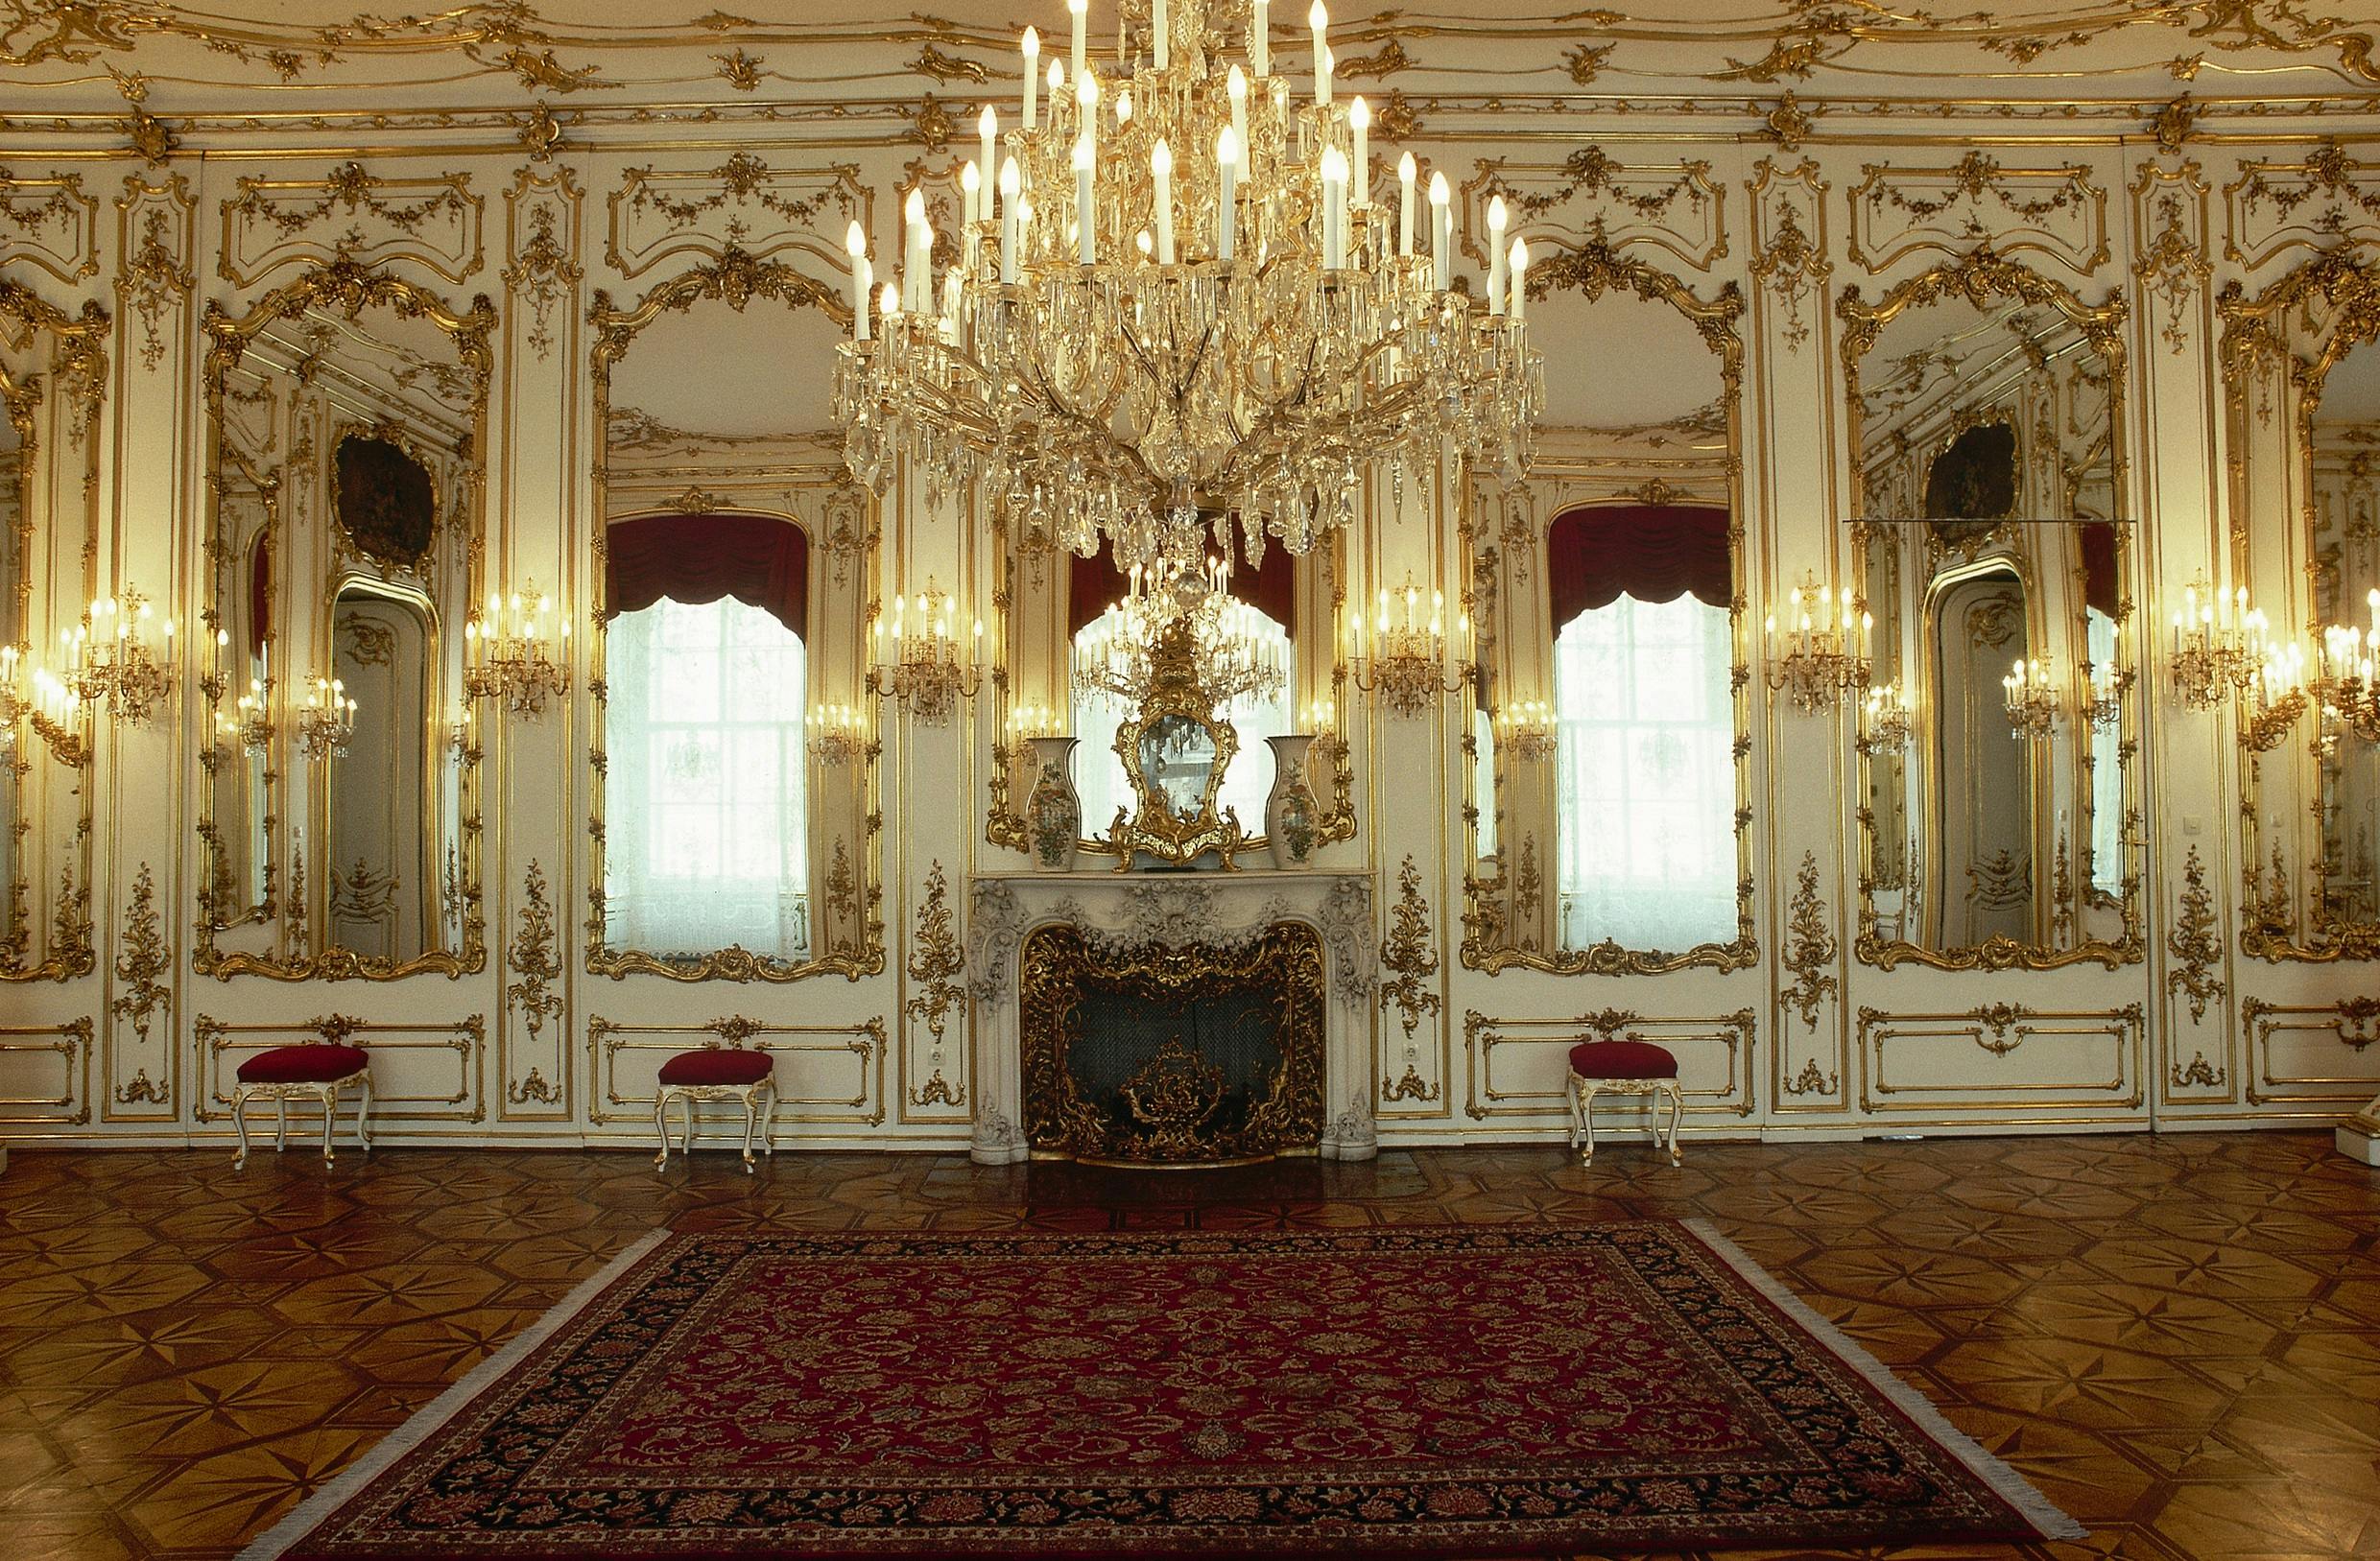 Empress Sisi and Imperial Apartments tour in Vienna